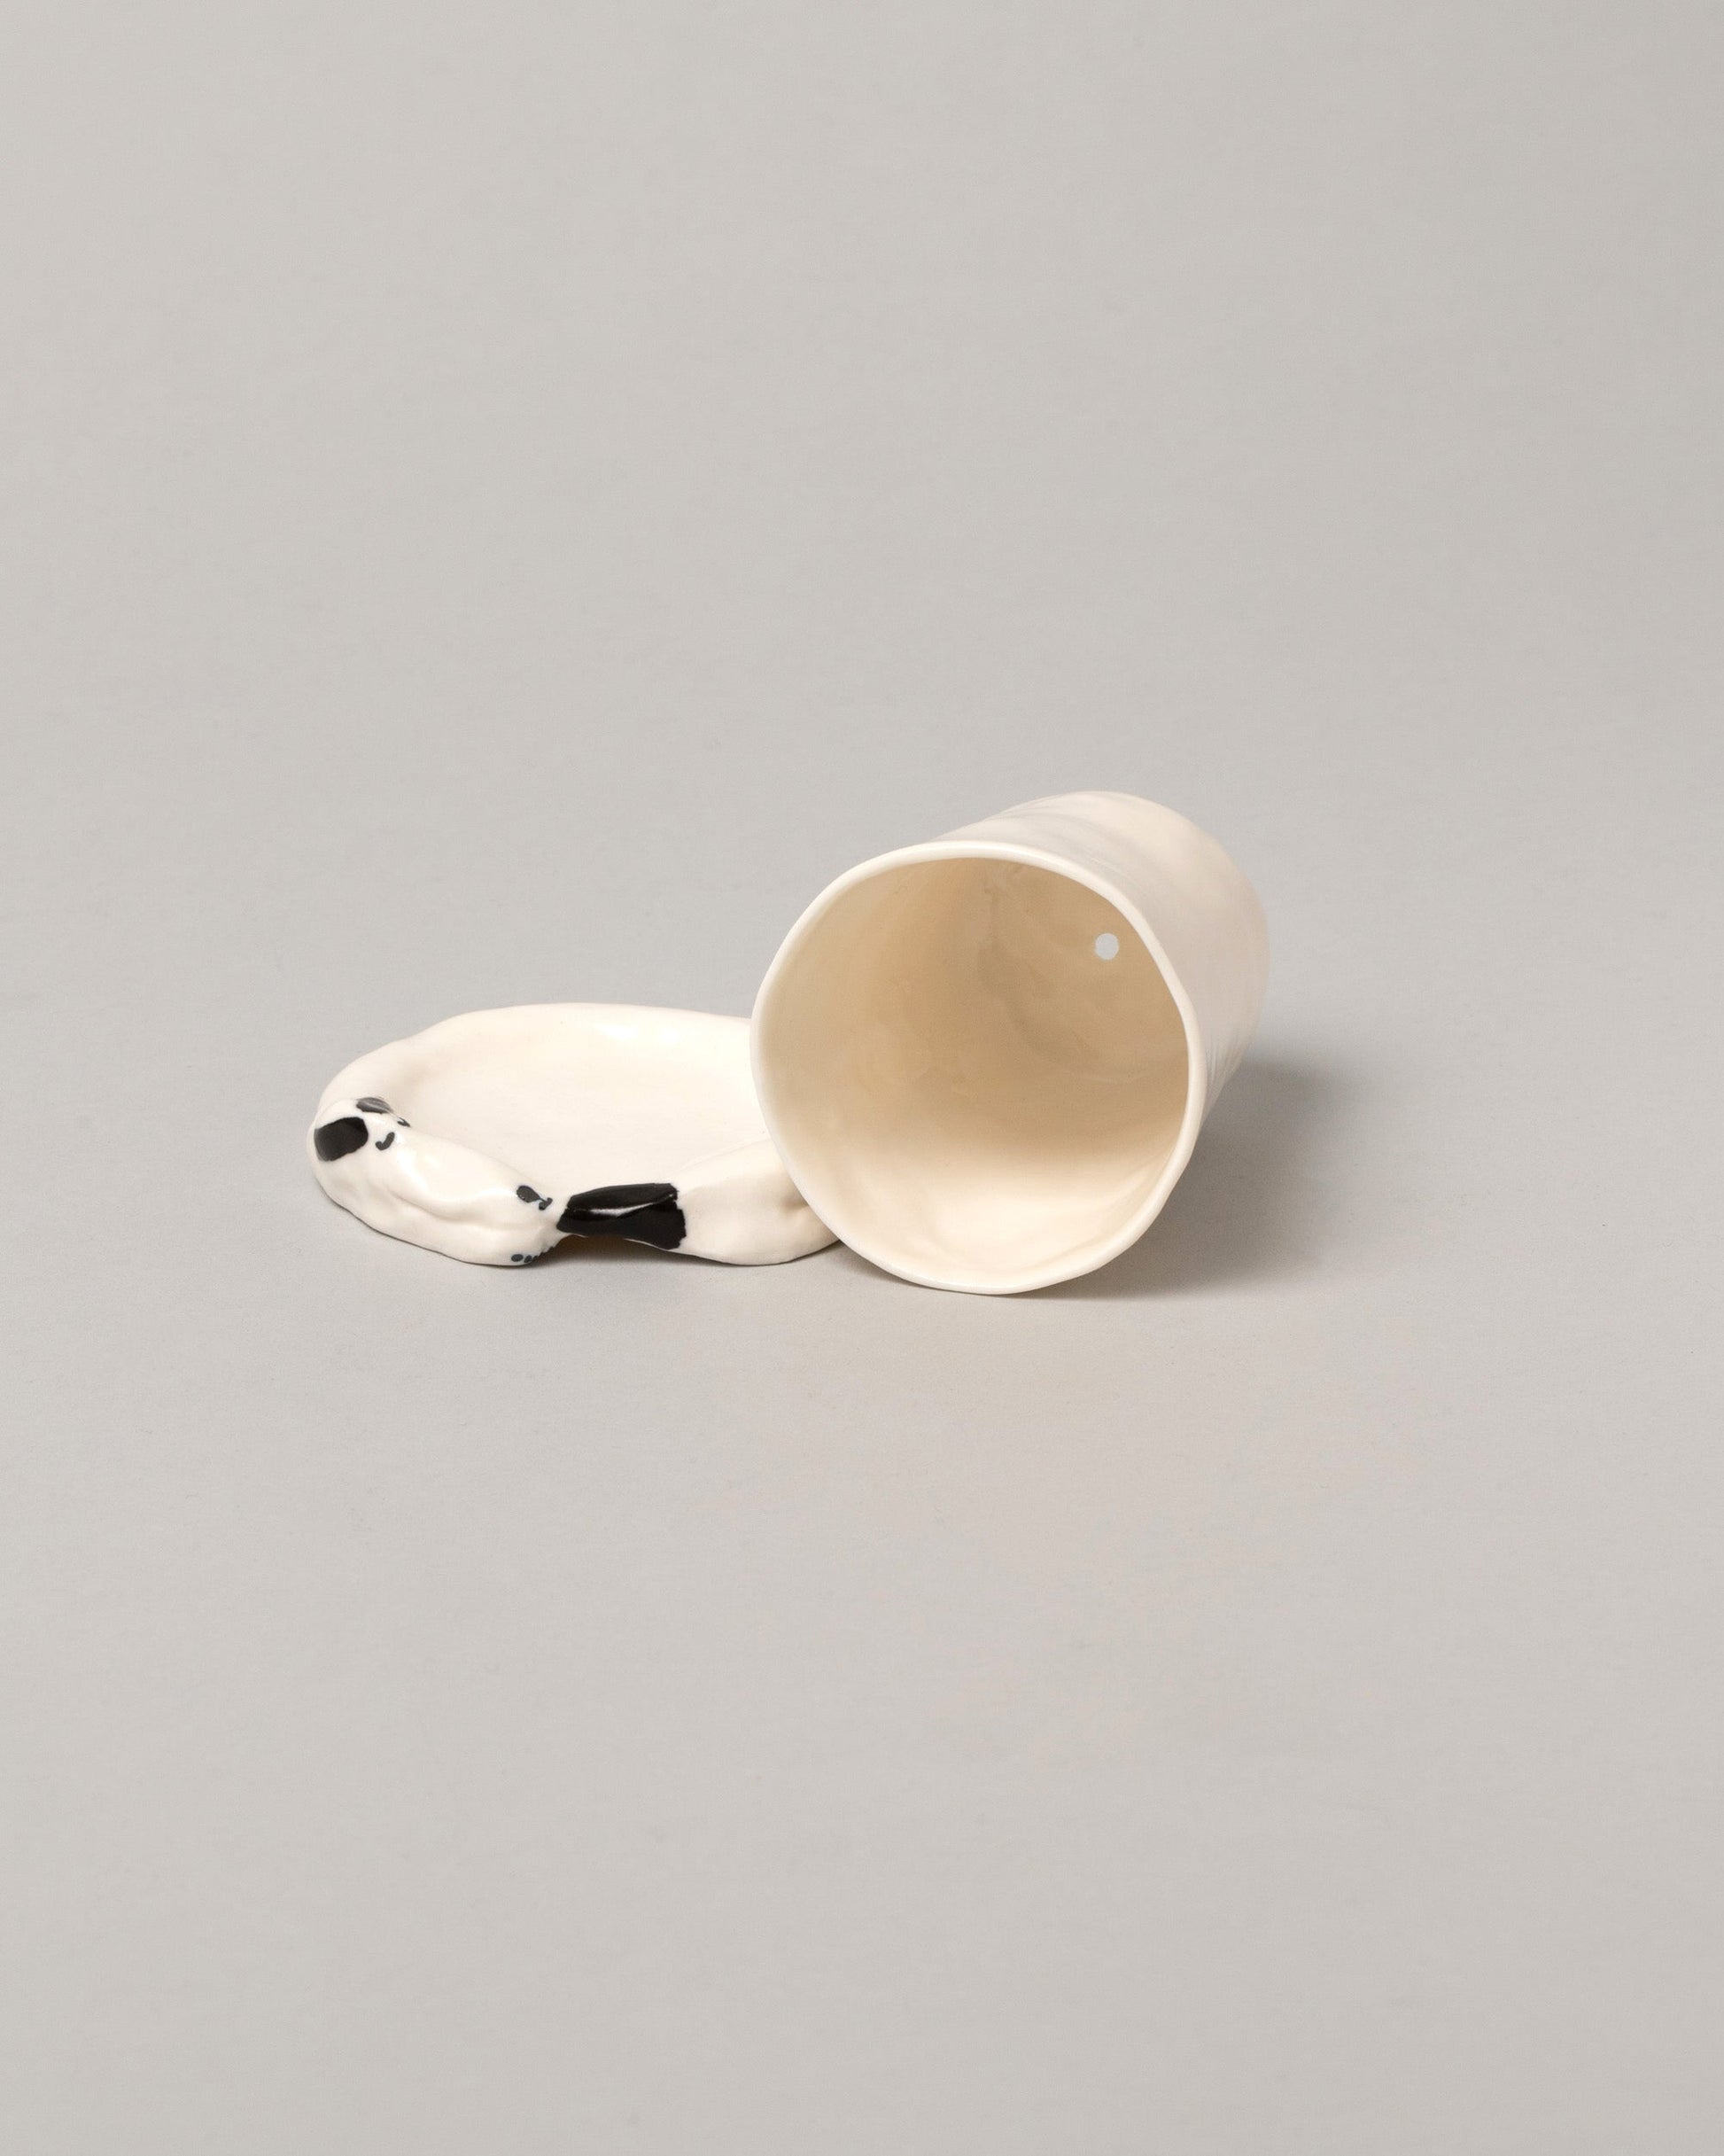 Inside view of the Eleonor Boström Small Pot Dog on light color background.